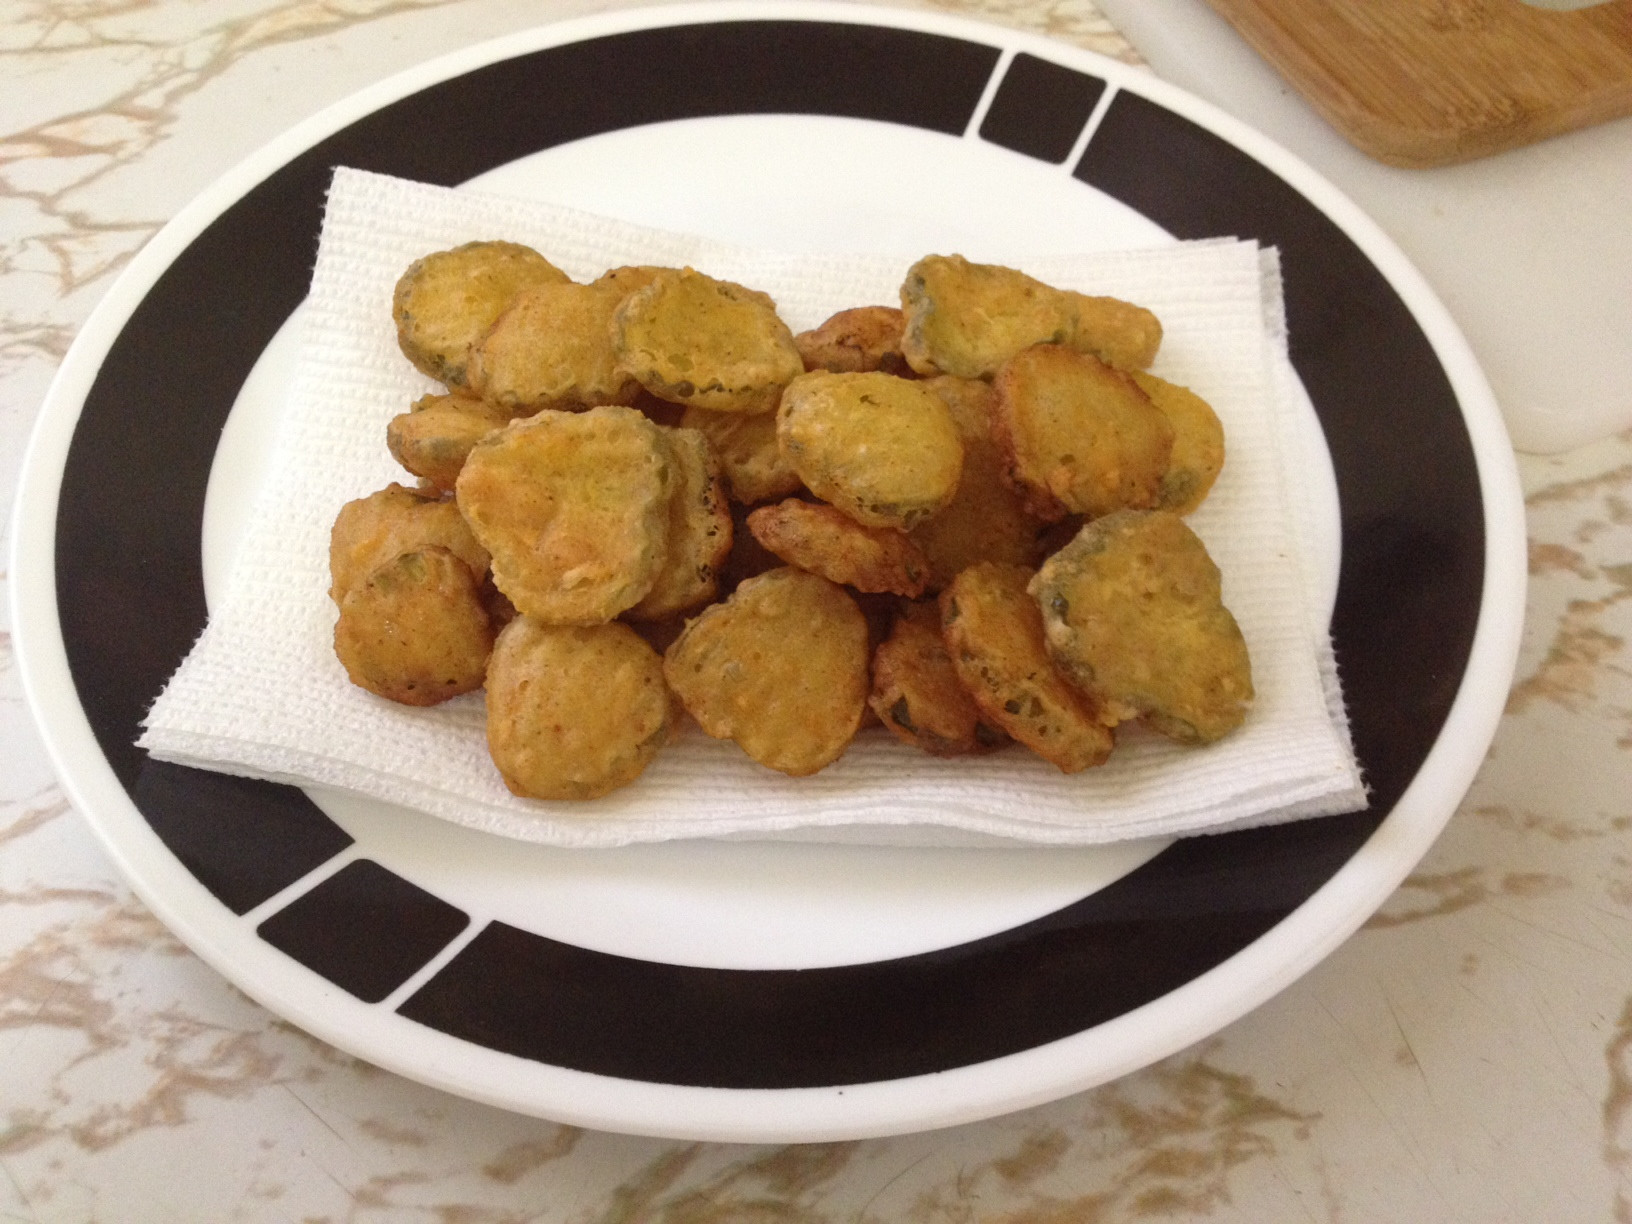 Fried pickles resting on a plate